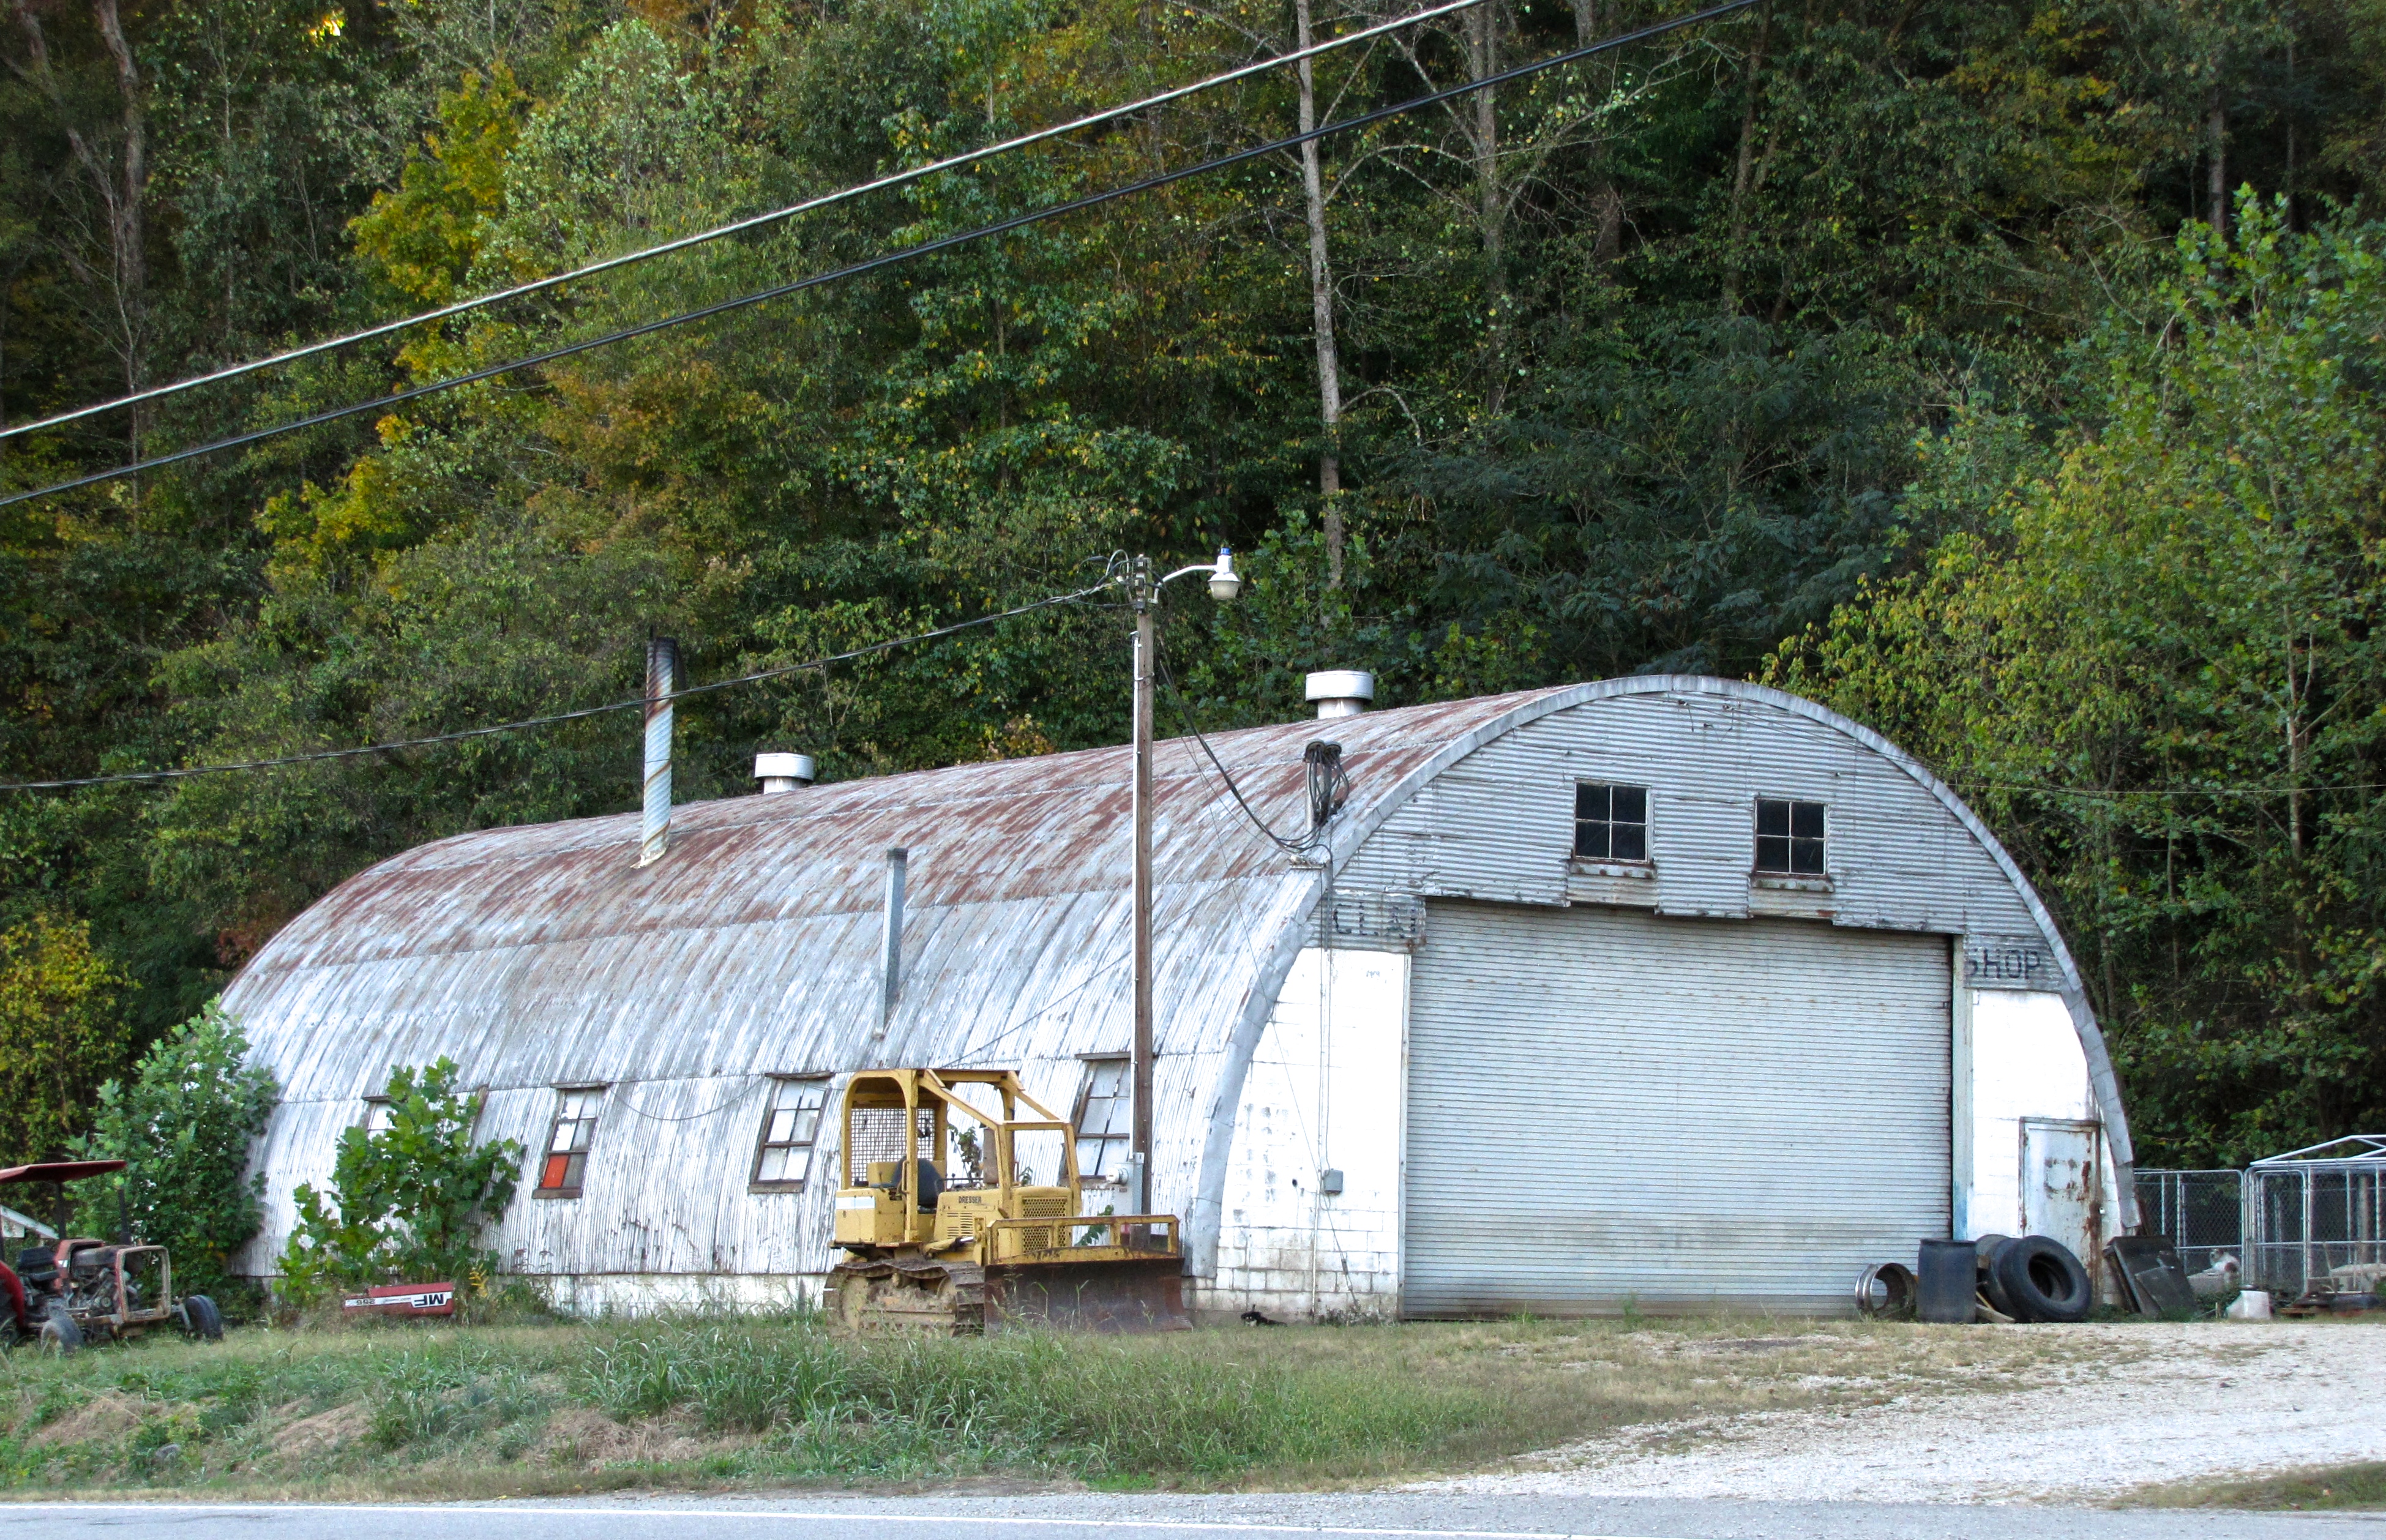 quonset hut in Allentown, PA